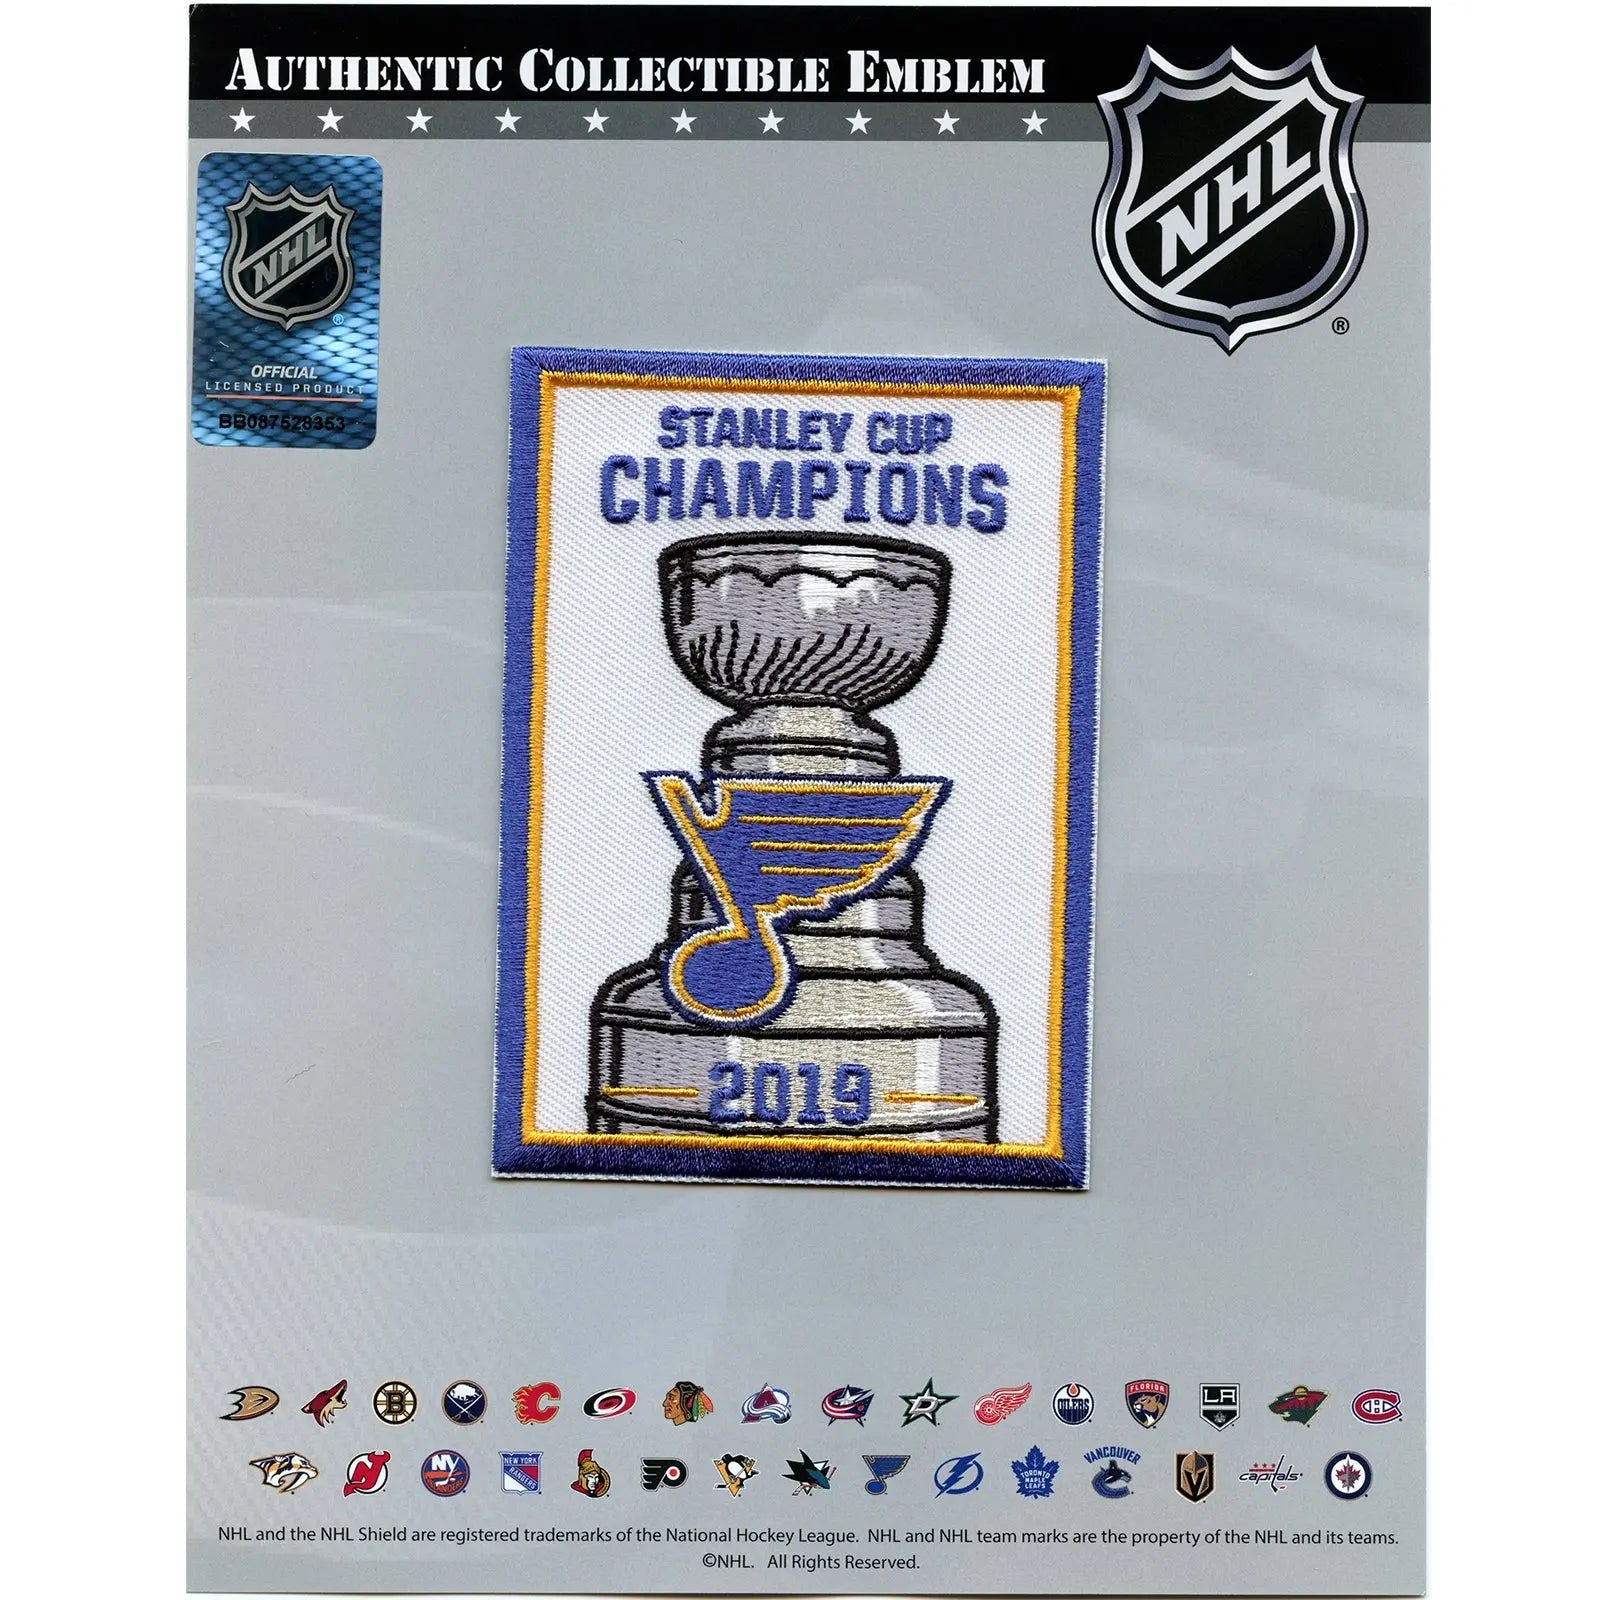 St. Louis Blues break tradition, wear Stanley Cup patch during home opener